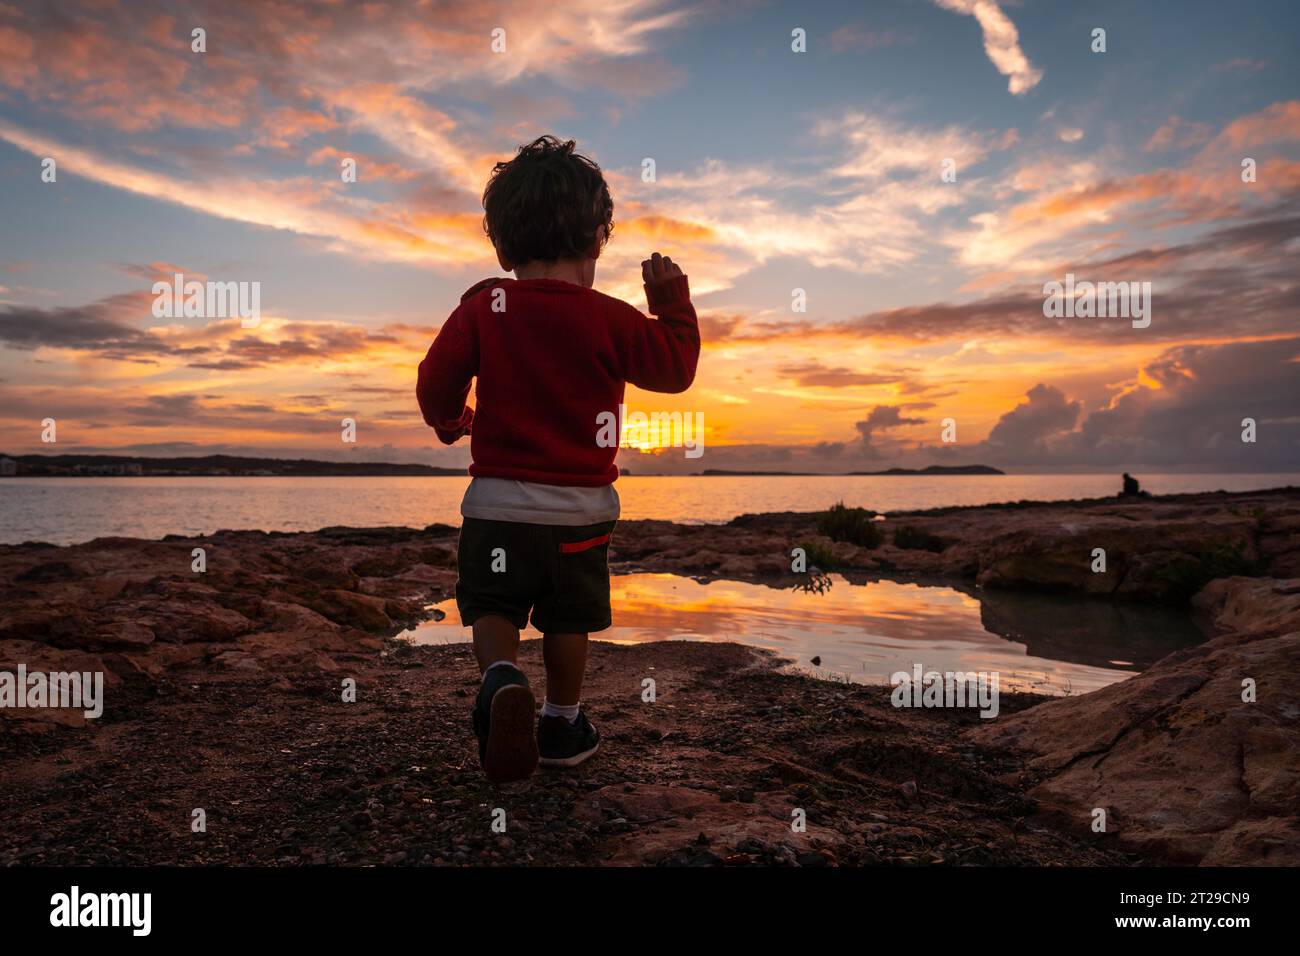 Sunset in Ibiza on vacation, a child running and laughing by the sea in San Antonio Abad Stock Photo